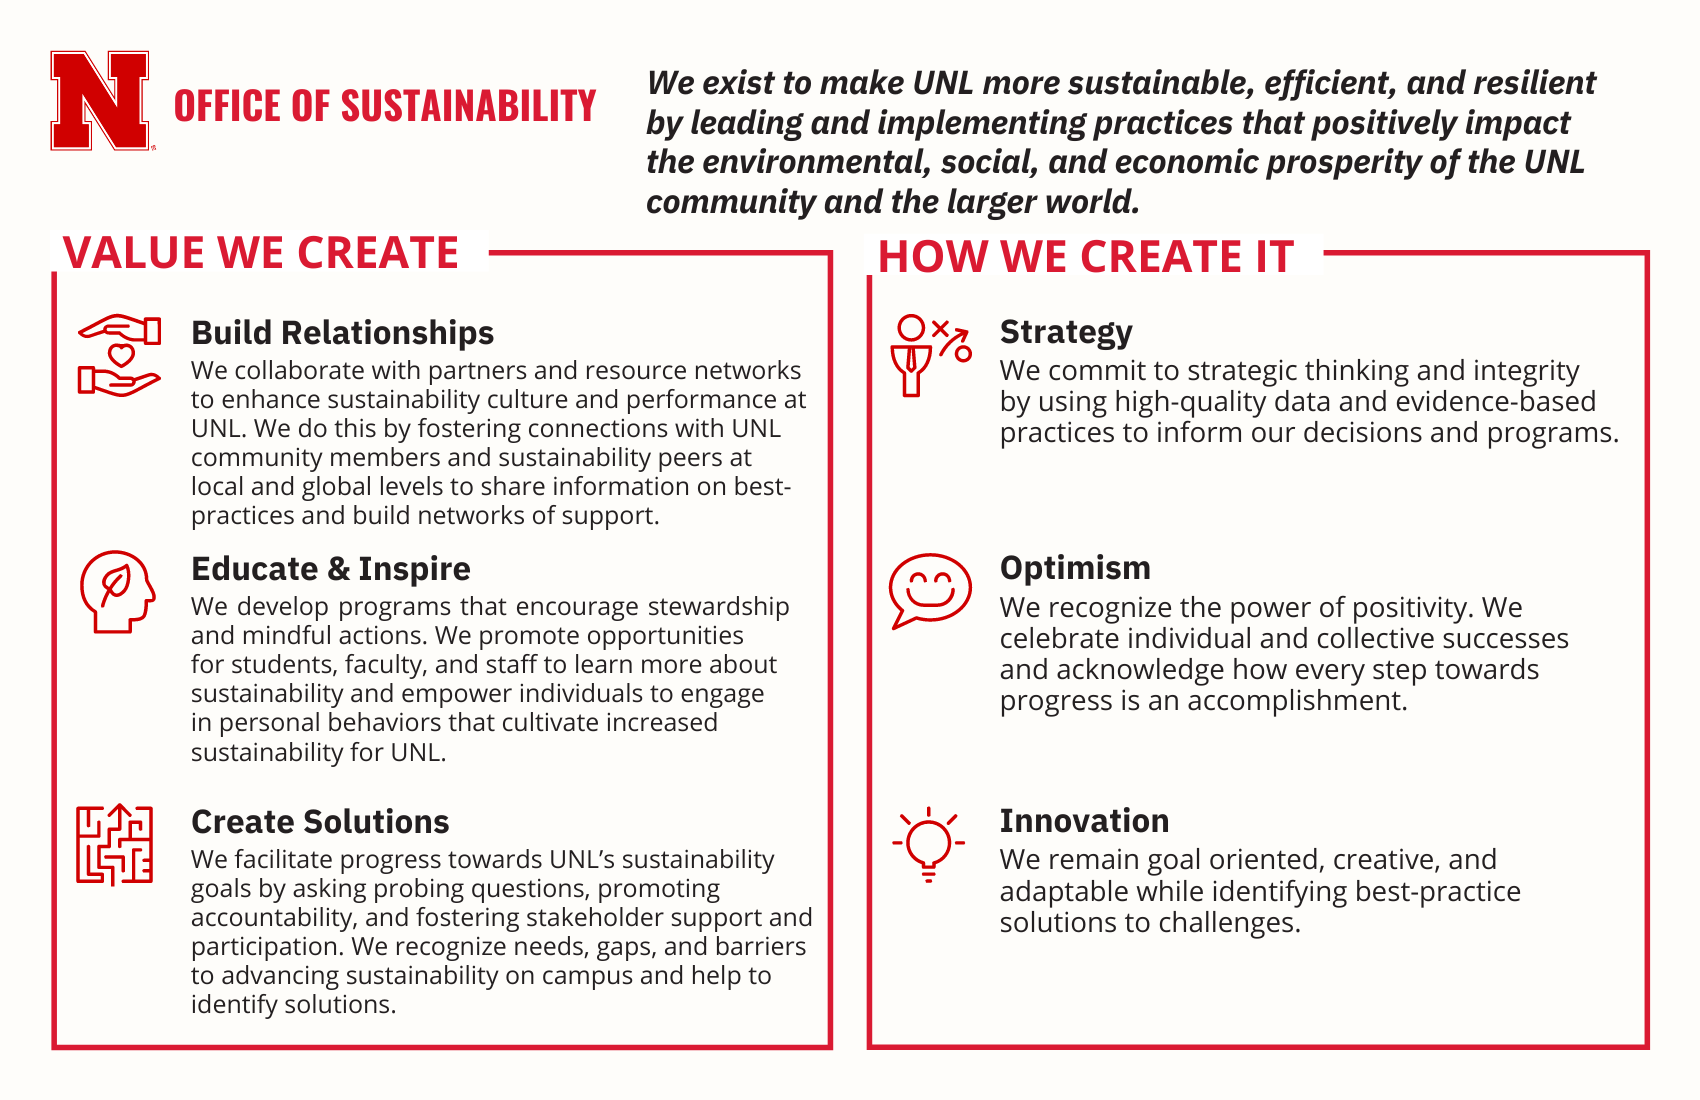 The Office of Sustainability's mission is to make UNL more sustainable, efficient, and resilient by leading and implementing practices that positively impact the environmental, social, and economic prosperity of the UNL community and the larger world.